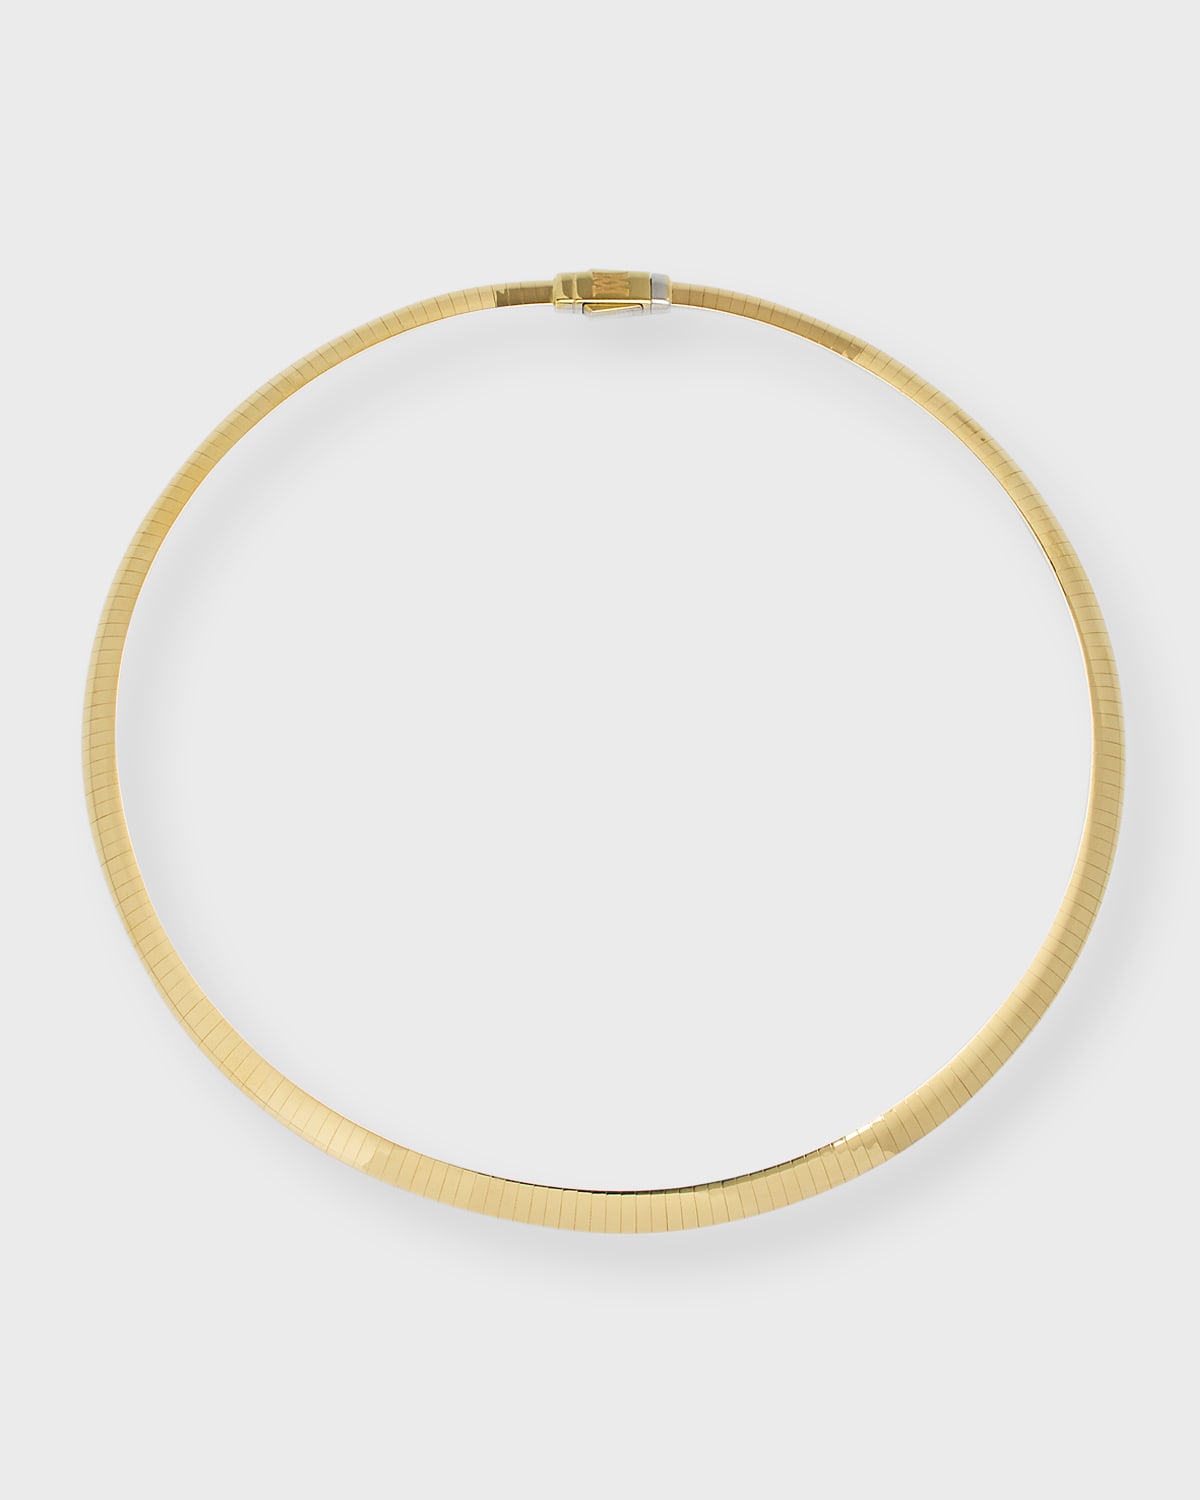 18K Gold Snake Chain Necklace, 6mm, 16"L